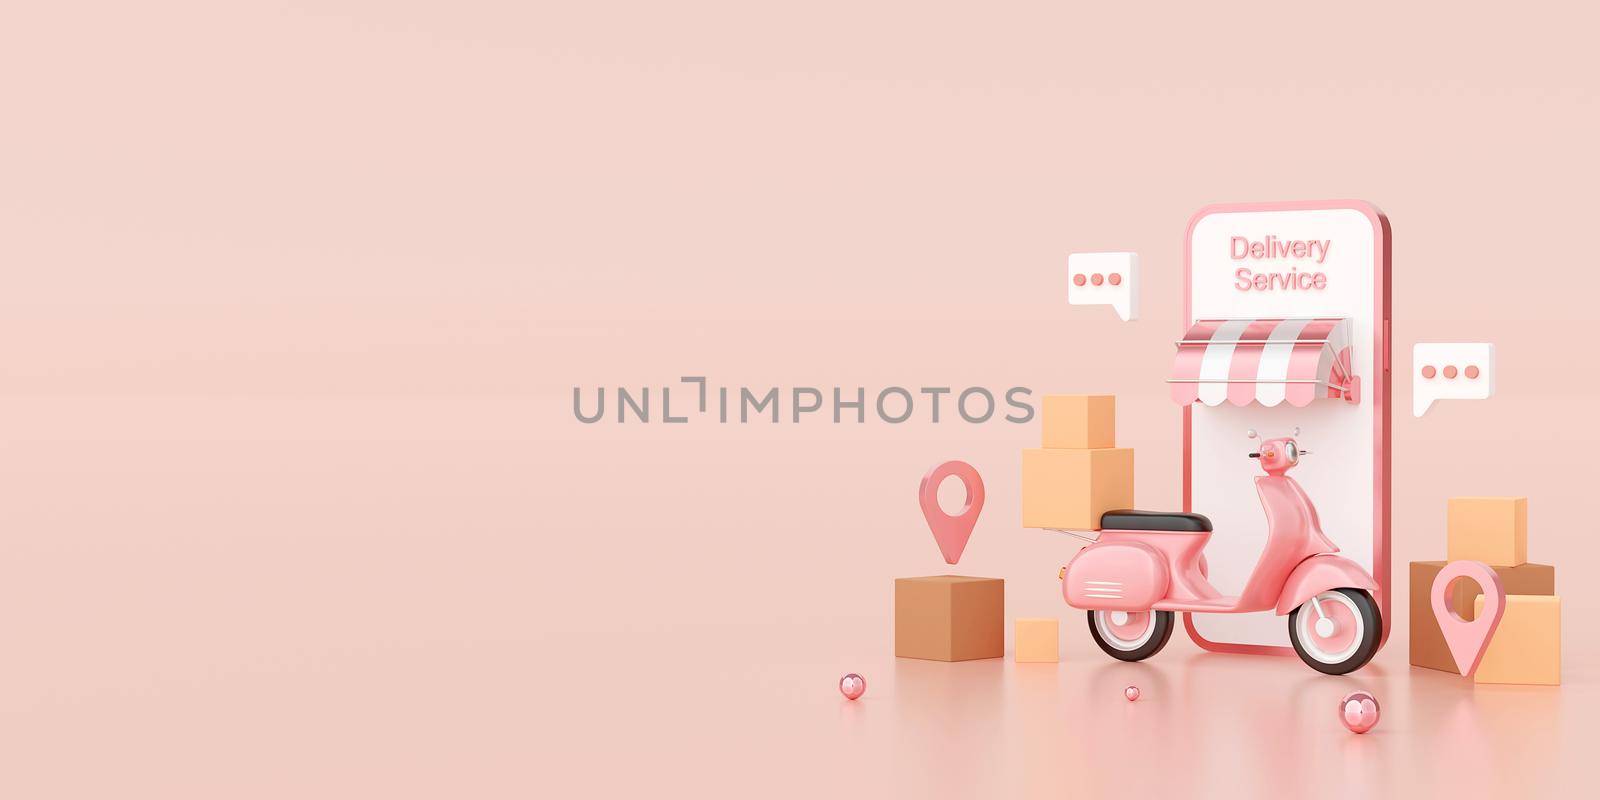 Delivery service on mobile application, Transportation or food delivery by scooter, 3d illustration